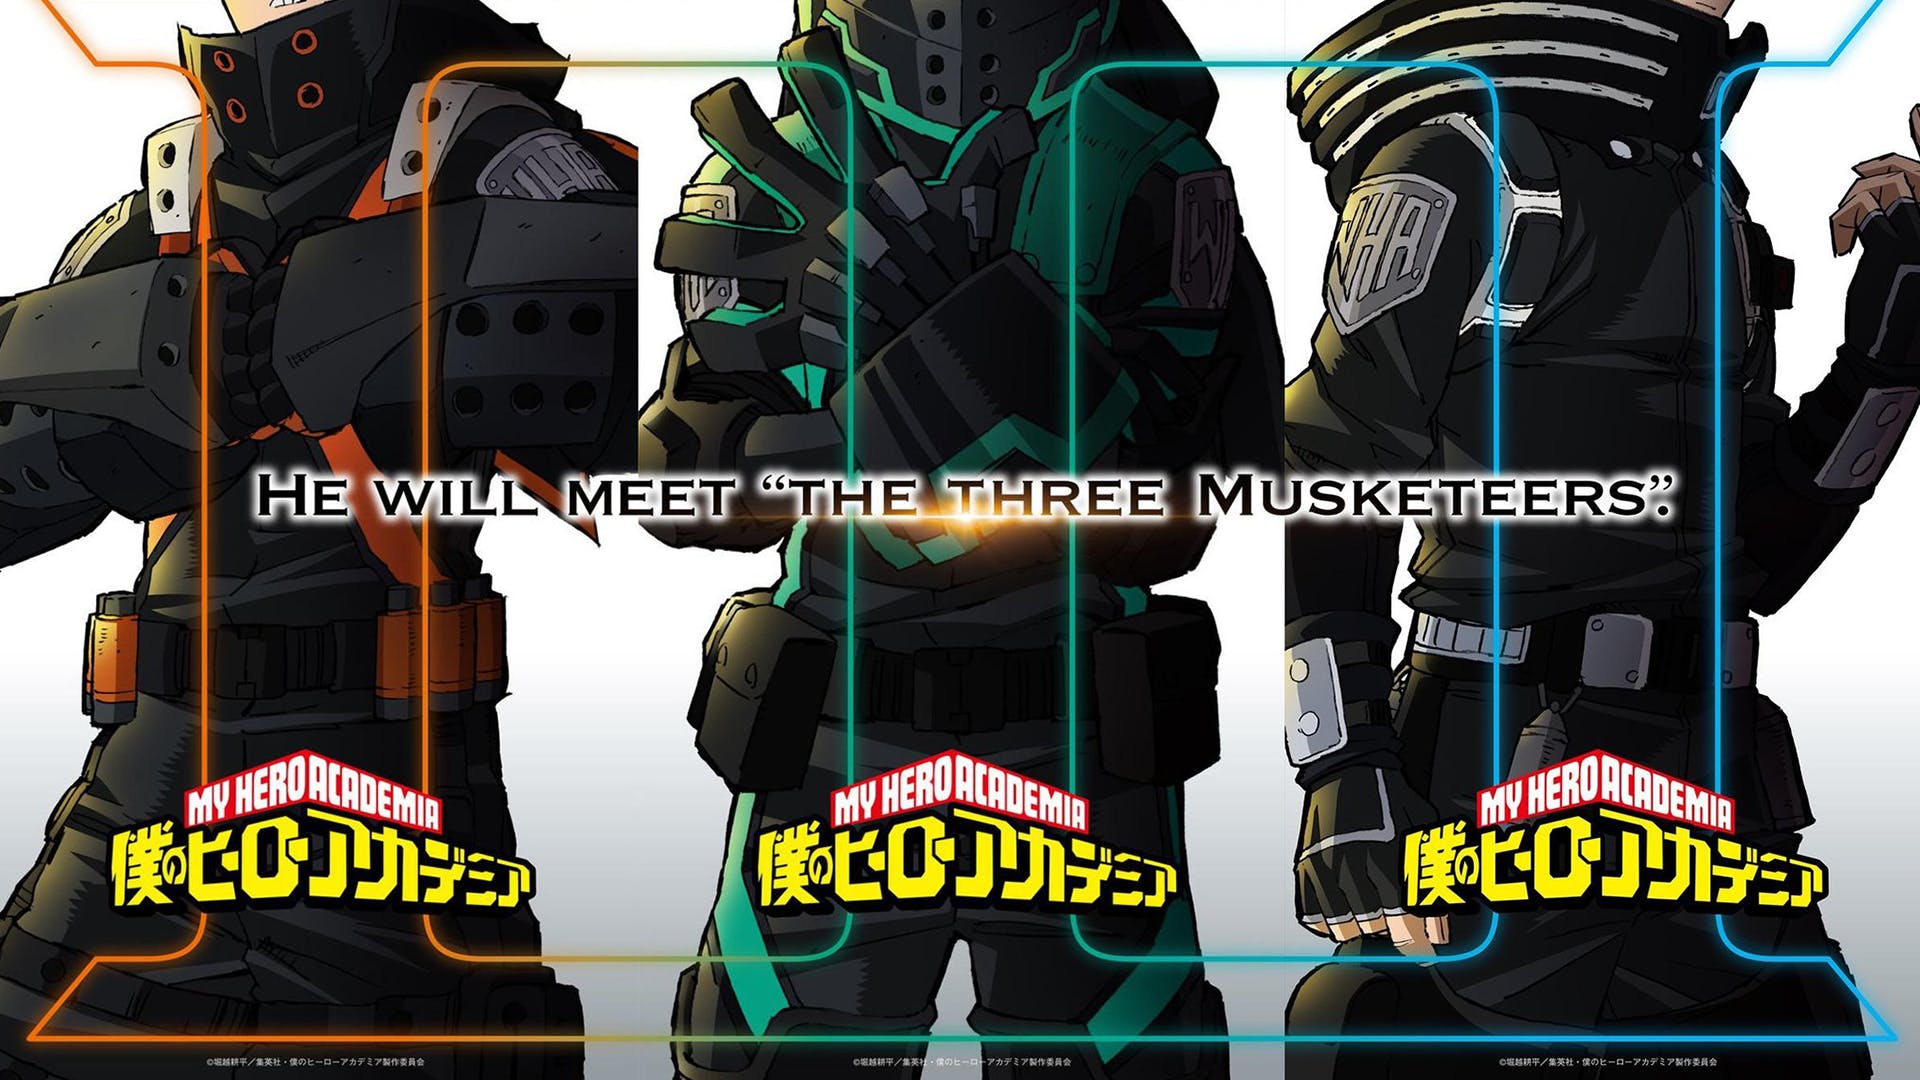 My Hero Academia Visual For New Project Revealed. The Nerd Stash